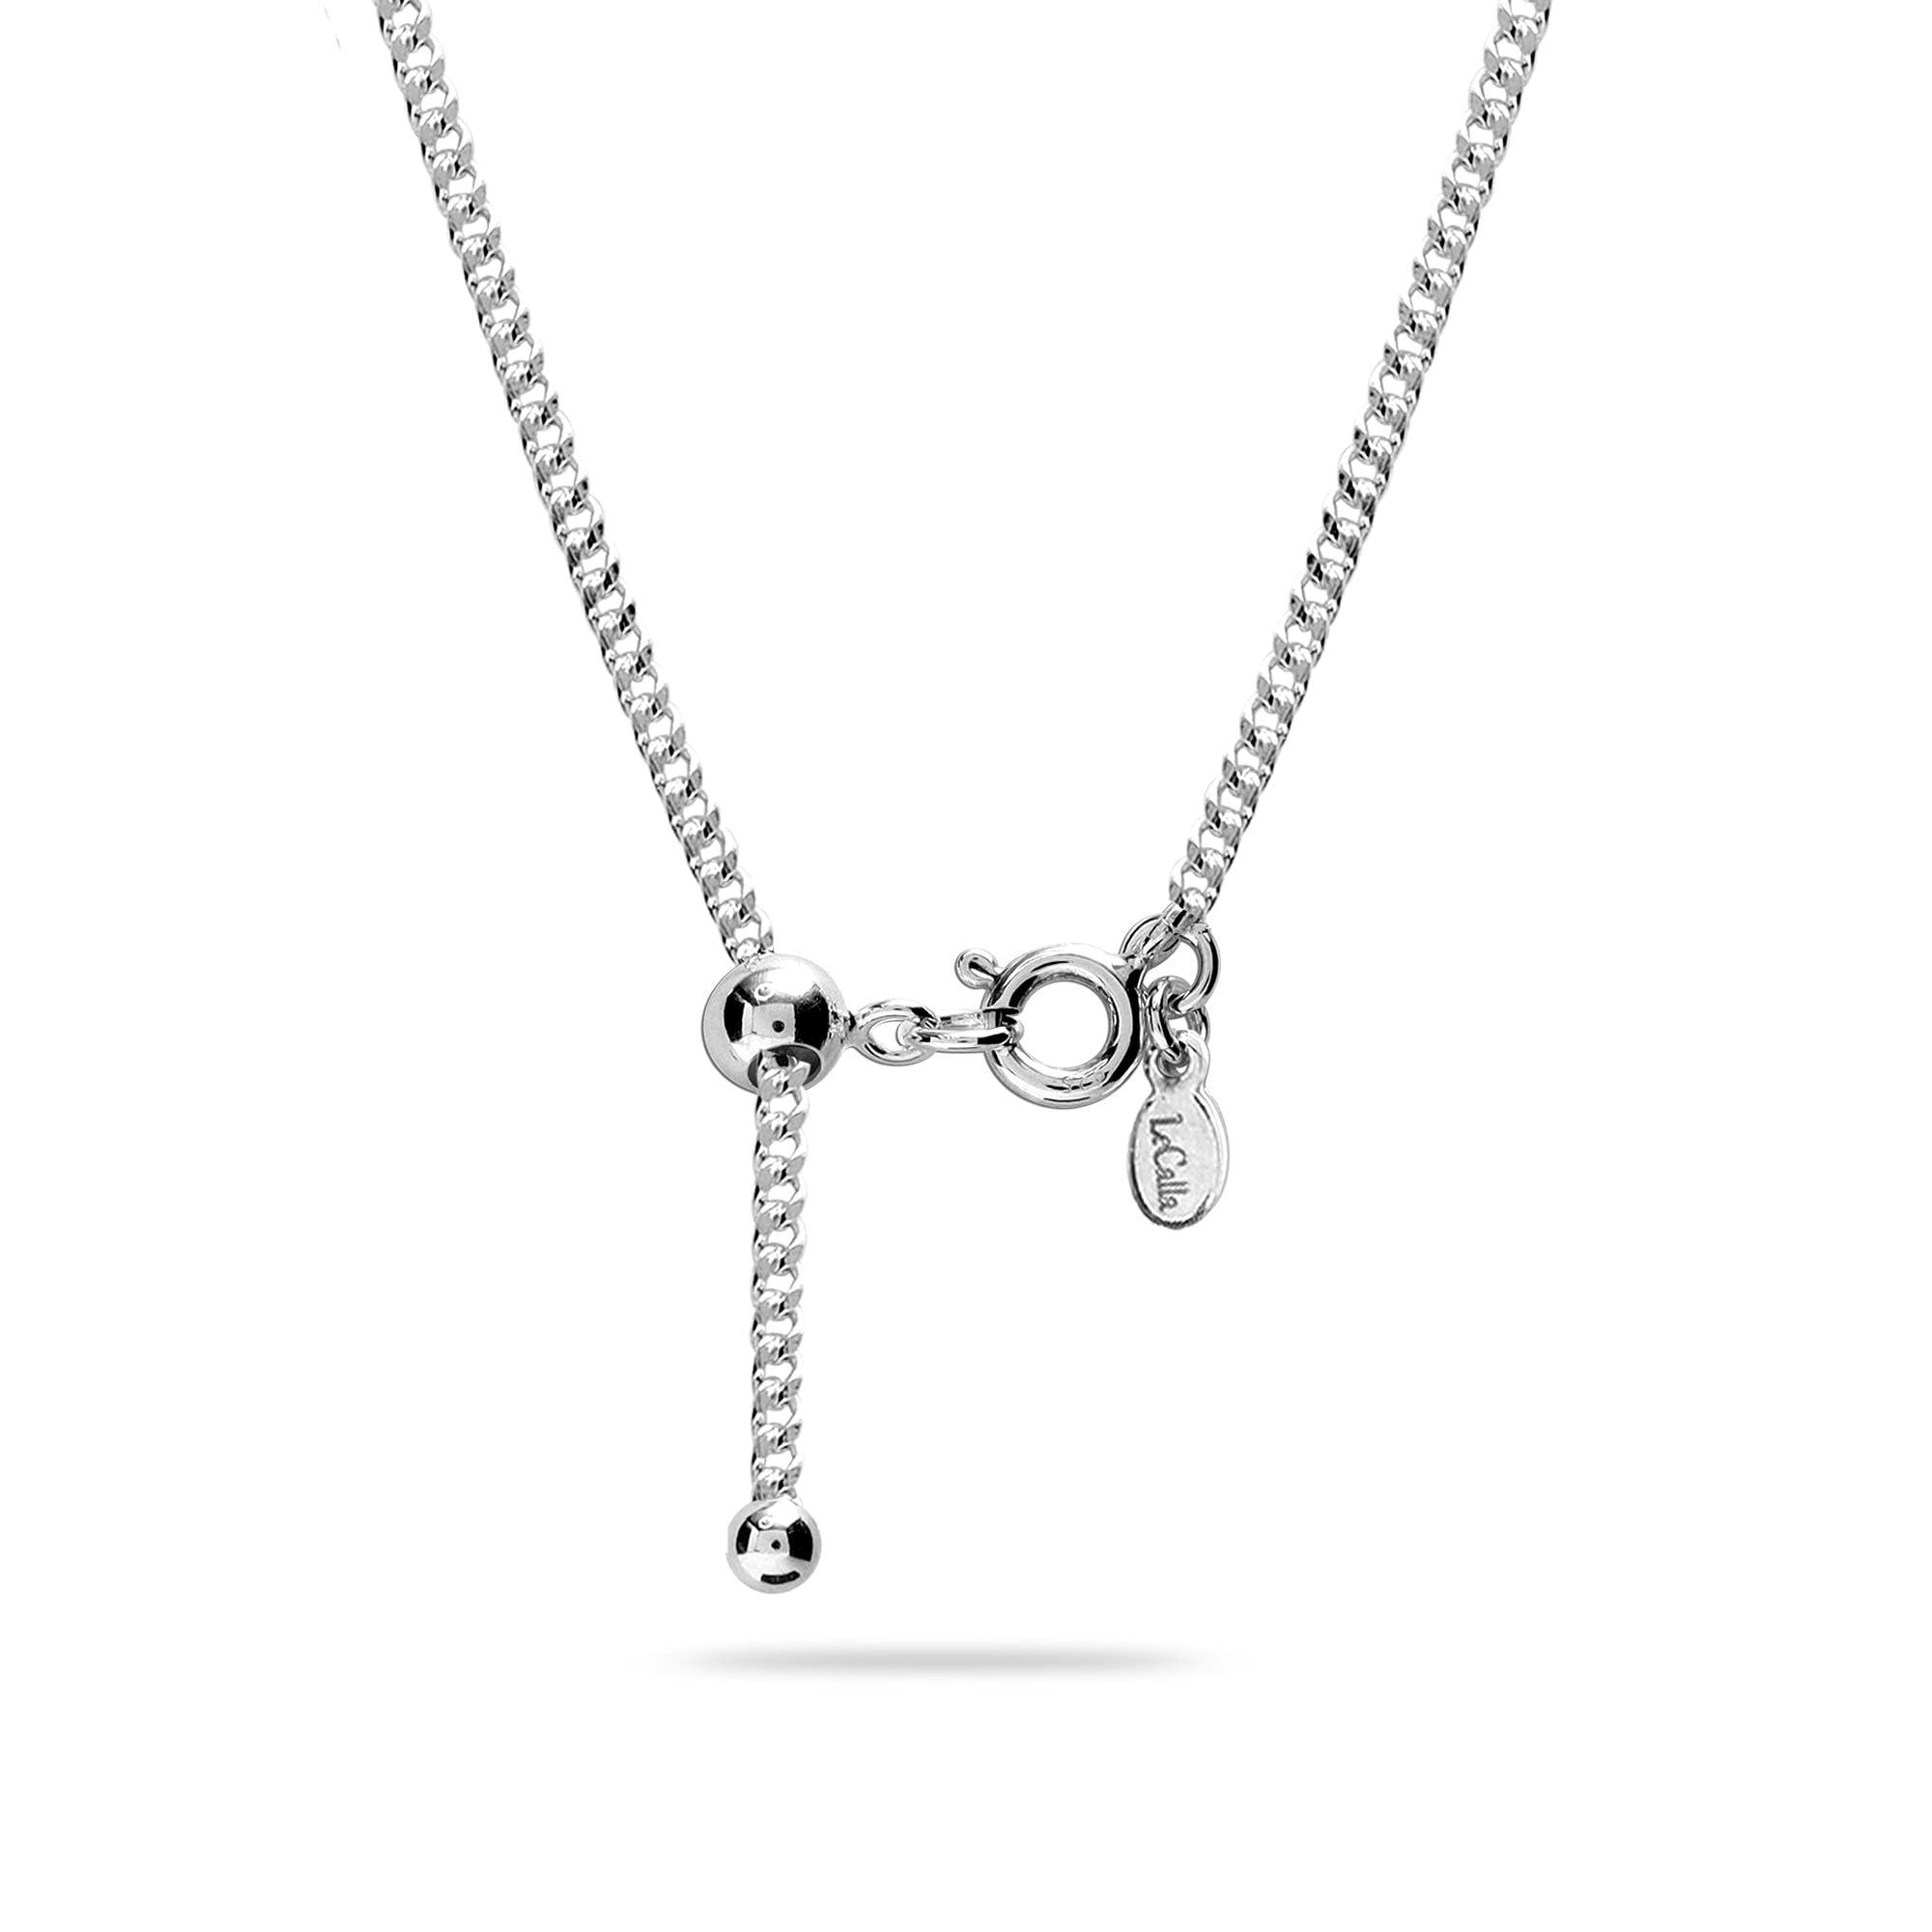 925 Sterling Silver Italian Adjustable Curb Chain Necklace for Women 24 Inches